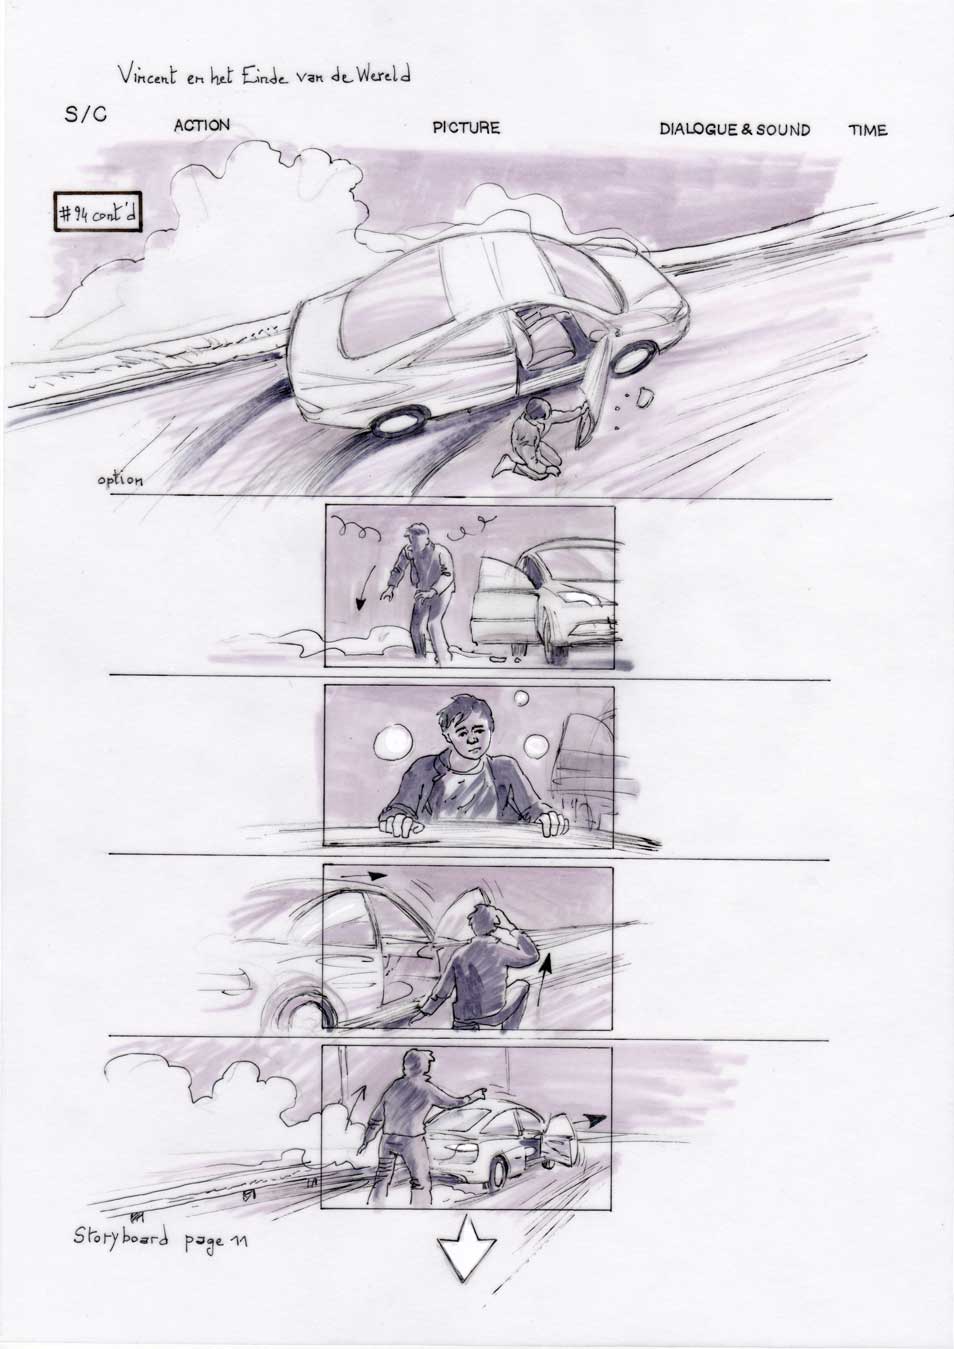 Vincent and the End of the World storyboard 11